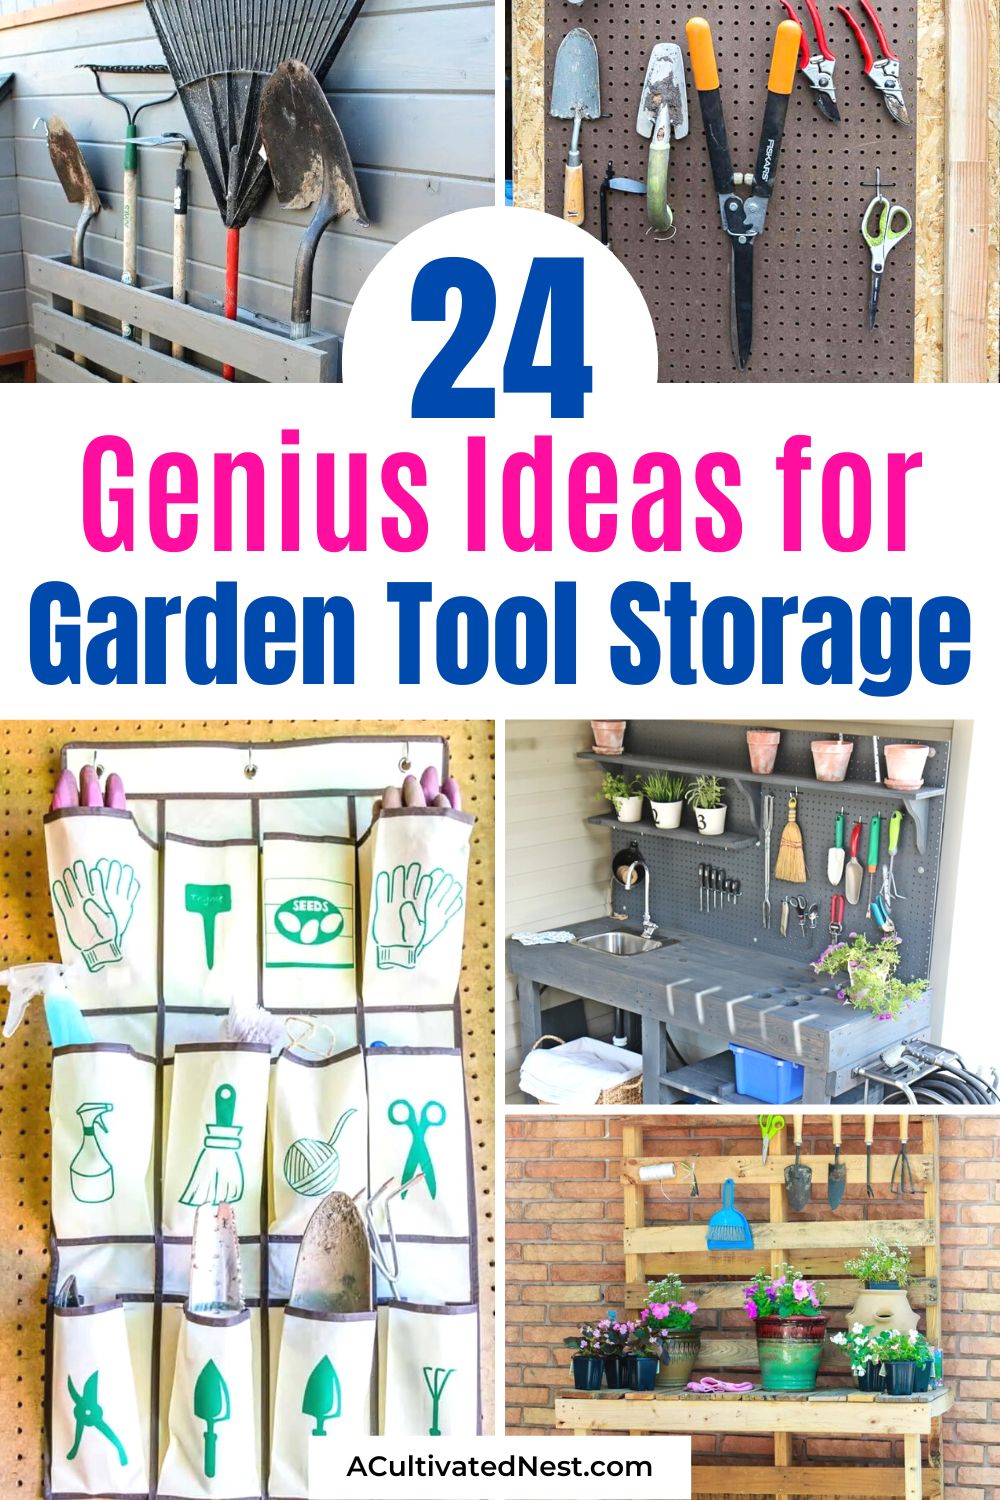  24 Genius DIY Garden Tool Storage Ideas- Tired of searching for your gardening tools every time you need them? These DIY garden tool storage ideas will help you declutter and optimize your garden space! | #gardening #gardenOrganization #organizing #gardenTools #ACultivatedNest